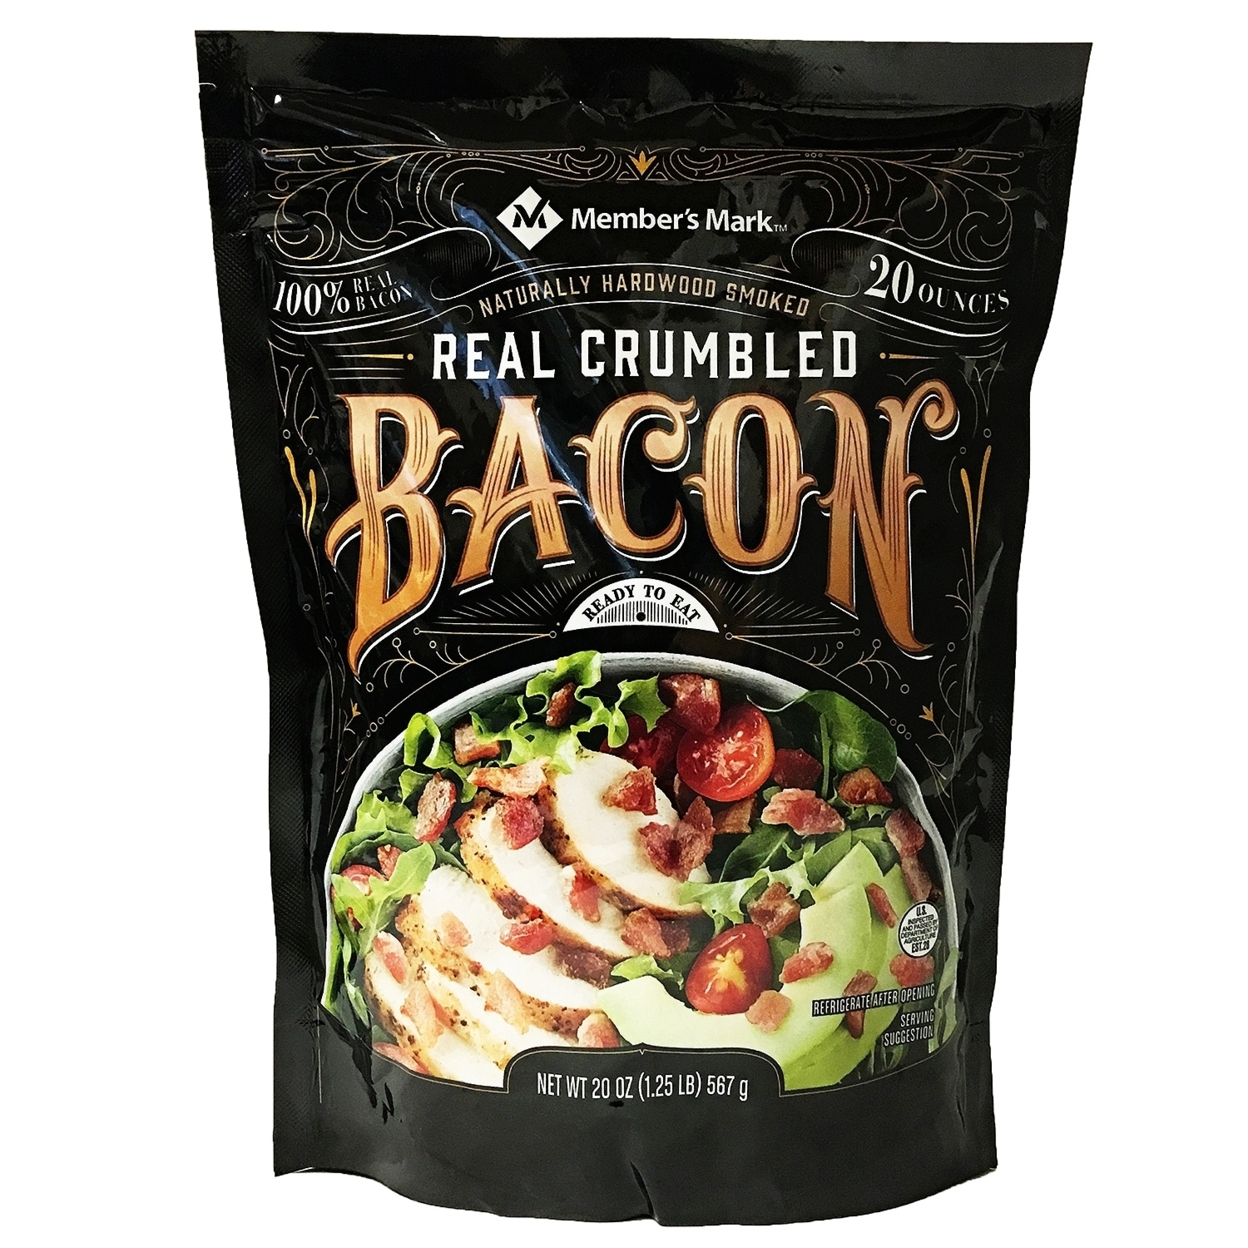 Member's Mark Real Crumbled Bacon (20 Ounce)